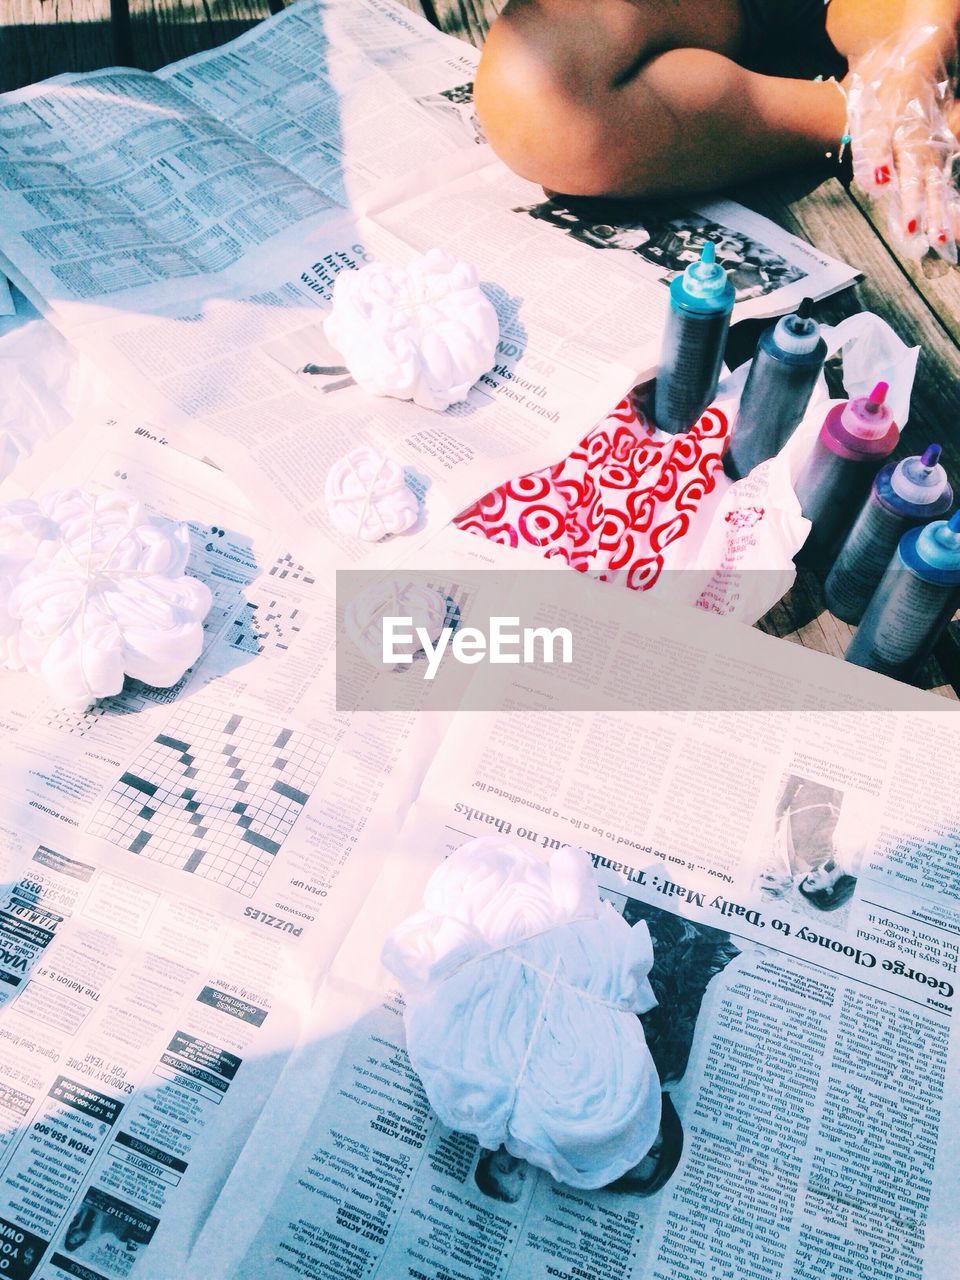 Cropped image of woman tie-dyeing clothes on newspaper